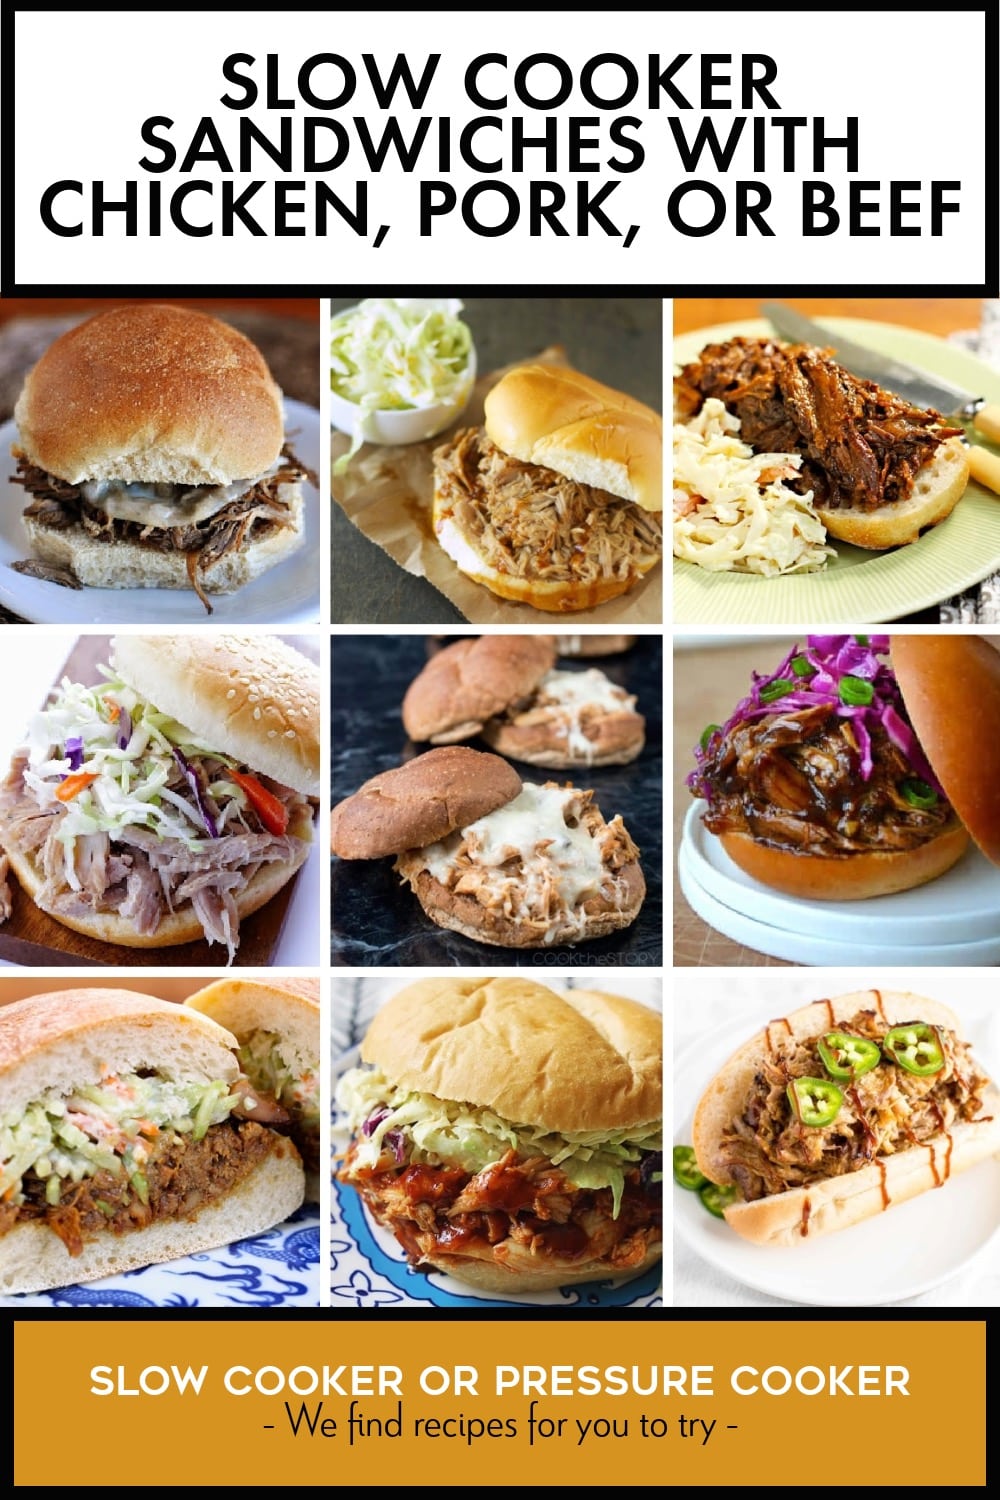 Pinterest image of Slow Cooker Sandwiches with Chicken, Pork, or Beef